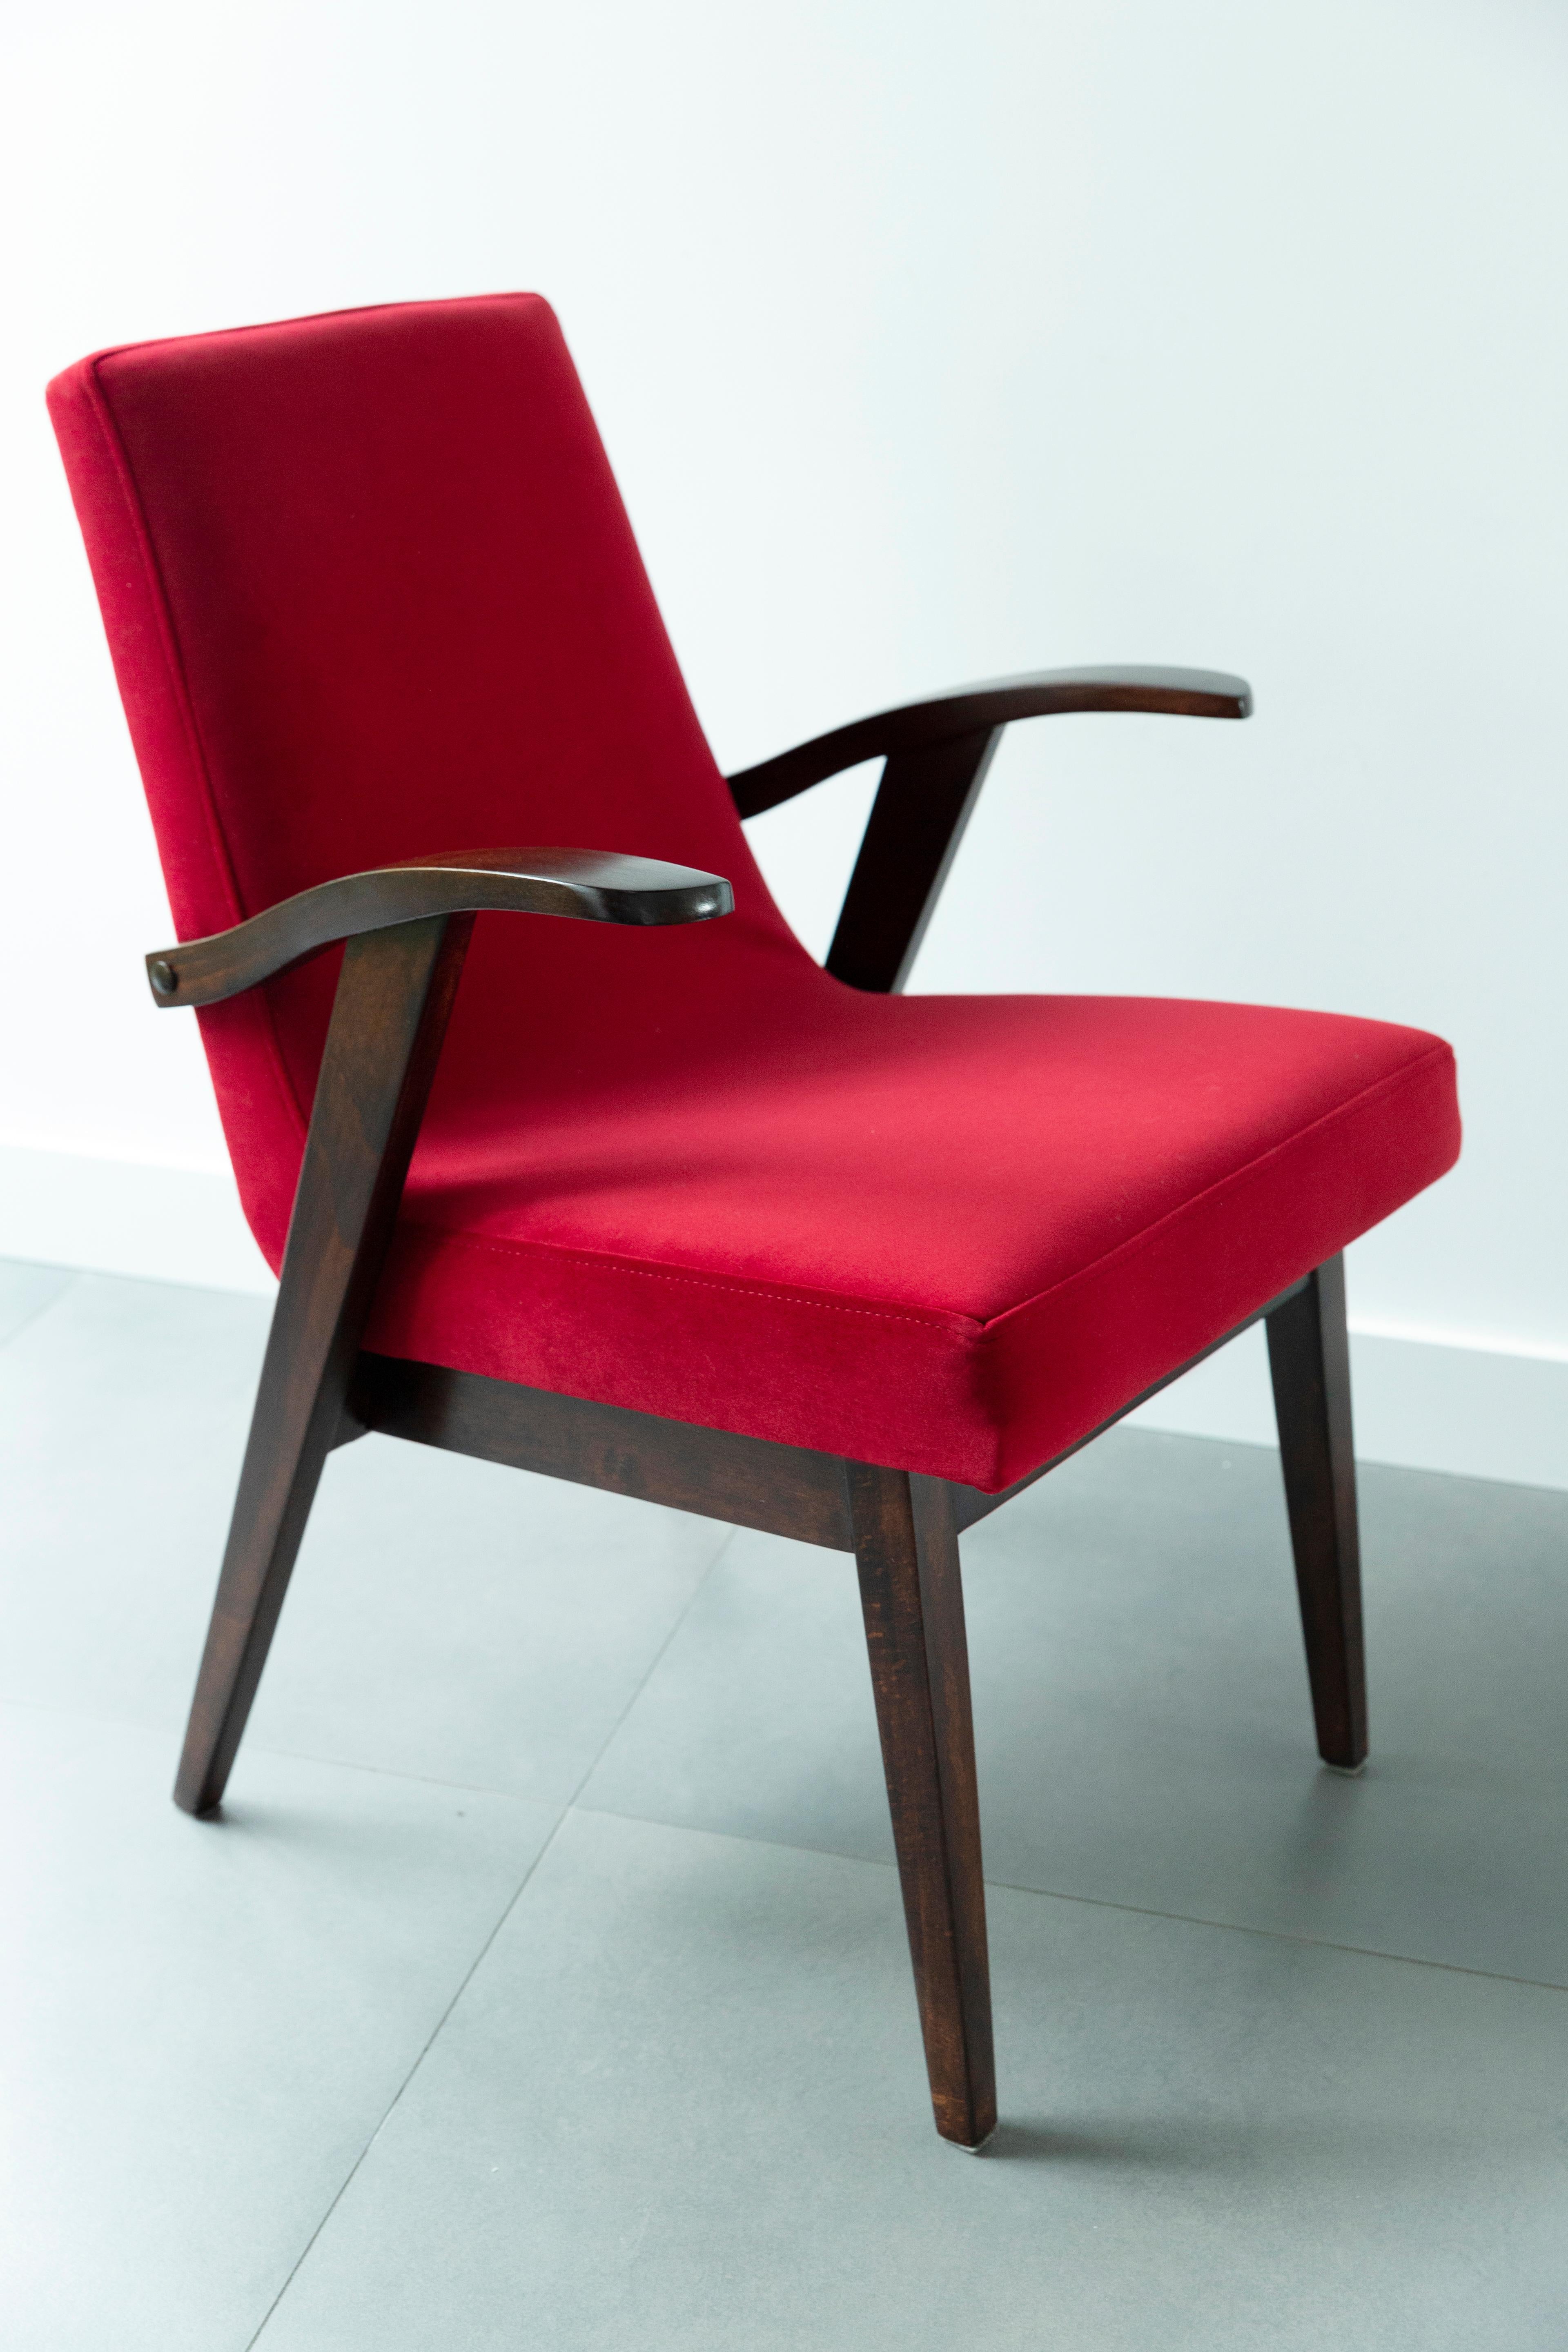 Polish 20th Century Vintage Red Armchair by Mieczyslaw Puchala, 1960s For Sale